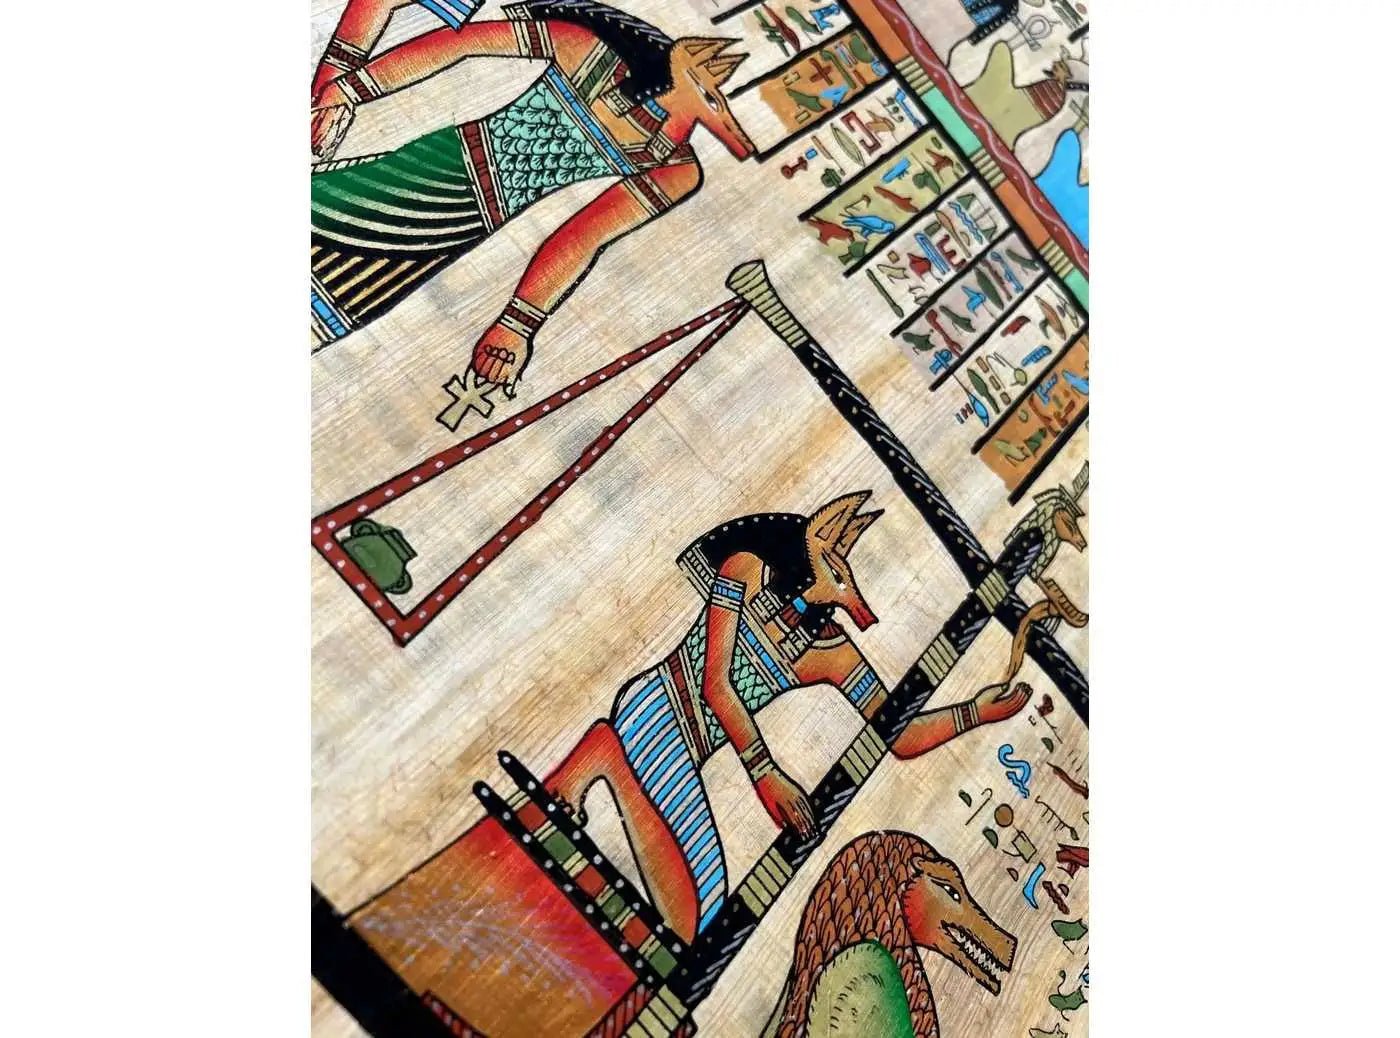 Last Judgement of Hunefer from His Tomb The Book of the Dead Hand Painted on Papyrus Extra Large Home & Office Wall Decor